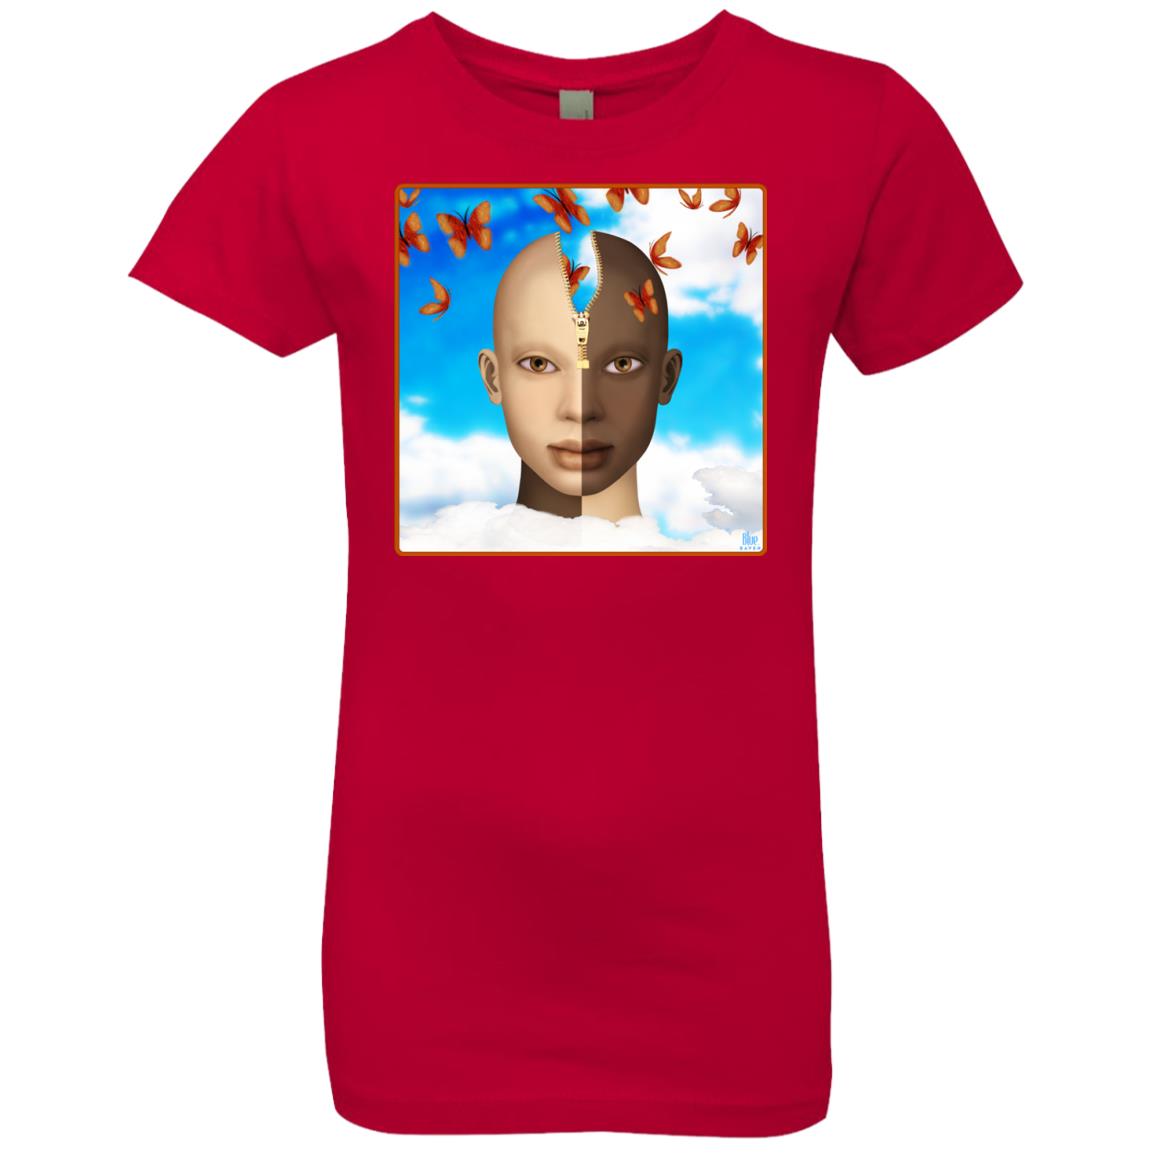 color of our thoughts - Girl's Premium Cotton T-Shirt